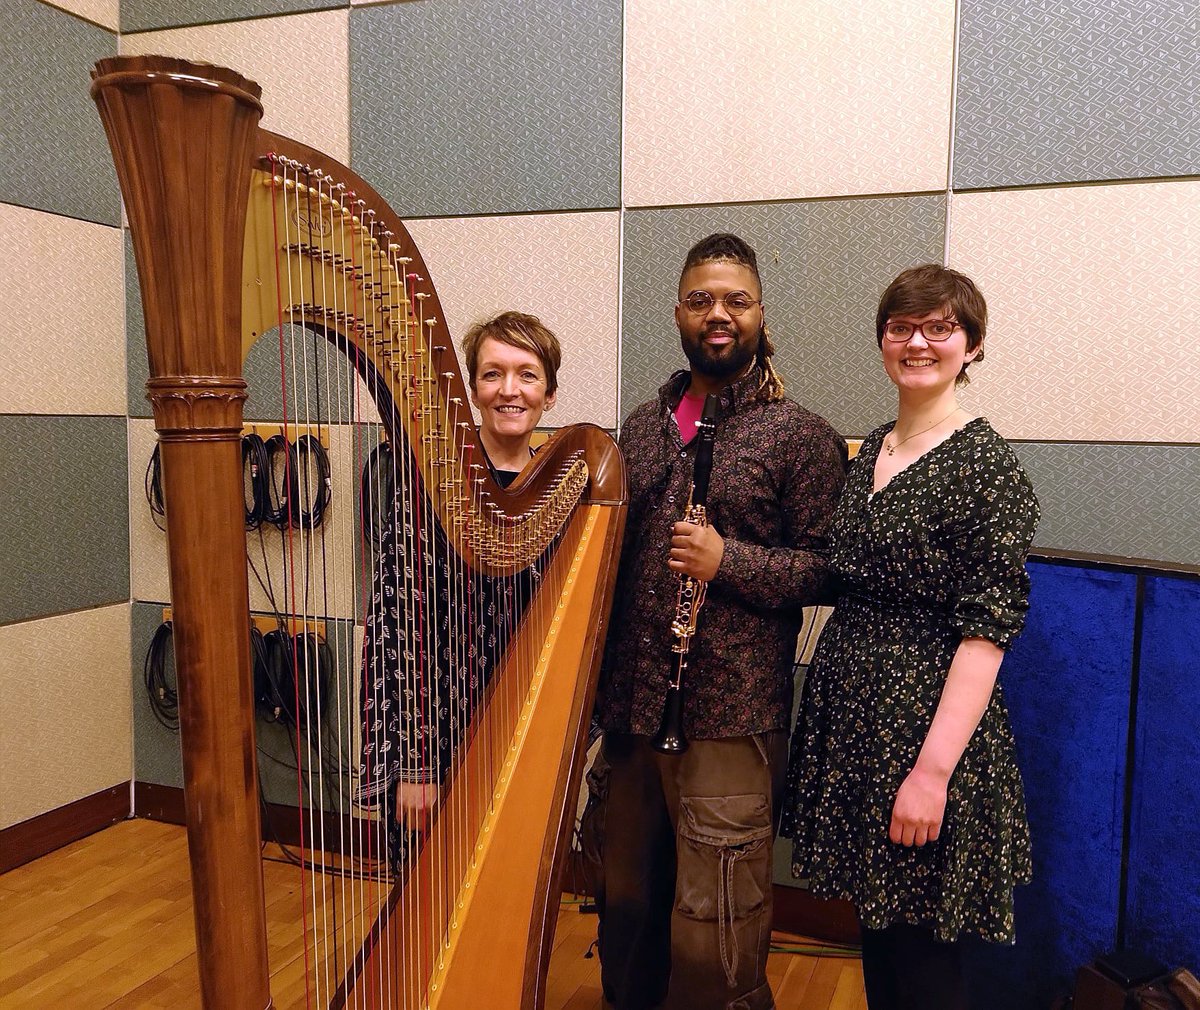 Aedín @lyricmoviemusic will be joined by clarinetist @Bergique & harpist @FionaGryson for a chat and a live studio performance of selections from their new album of chamber works Dathana: Hues and Shades. Tune into #AedínintheAfternoon from 1pm today rte.ie/radio/lyricfm/…